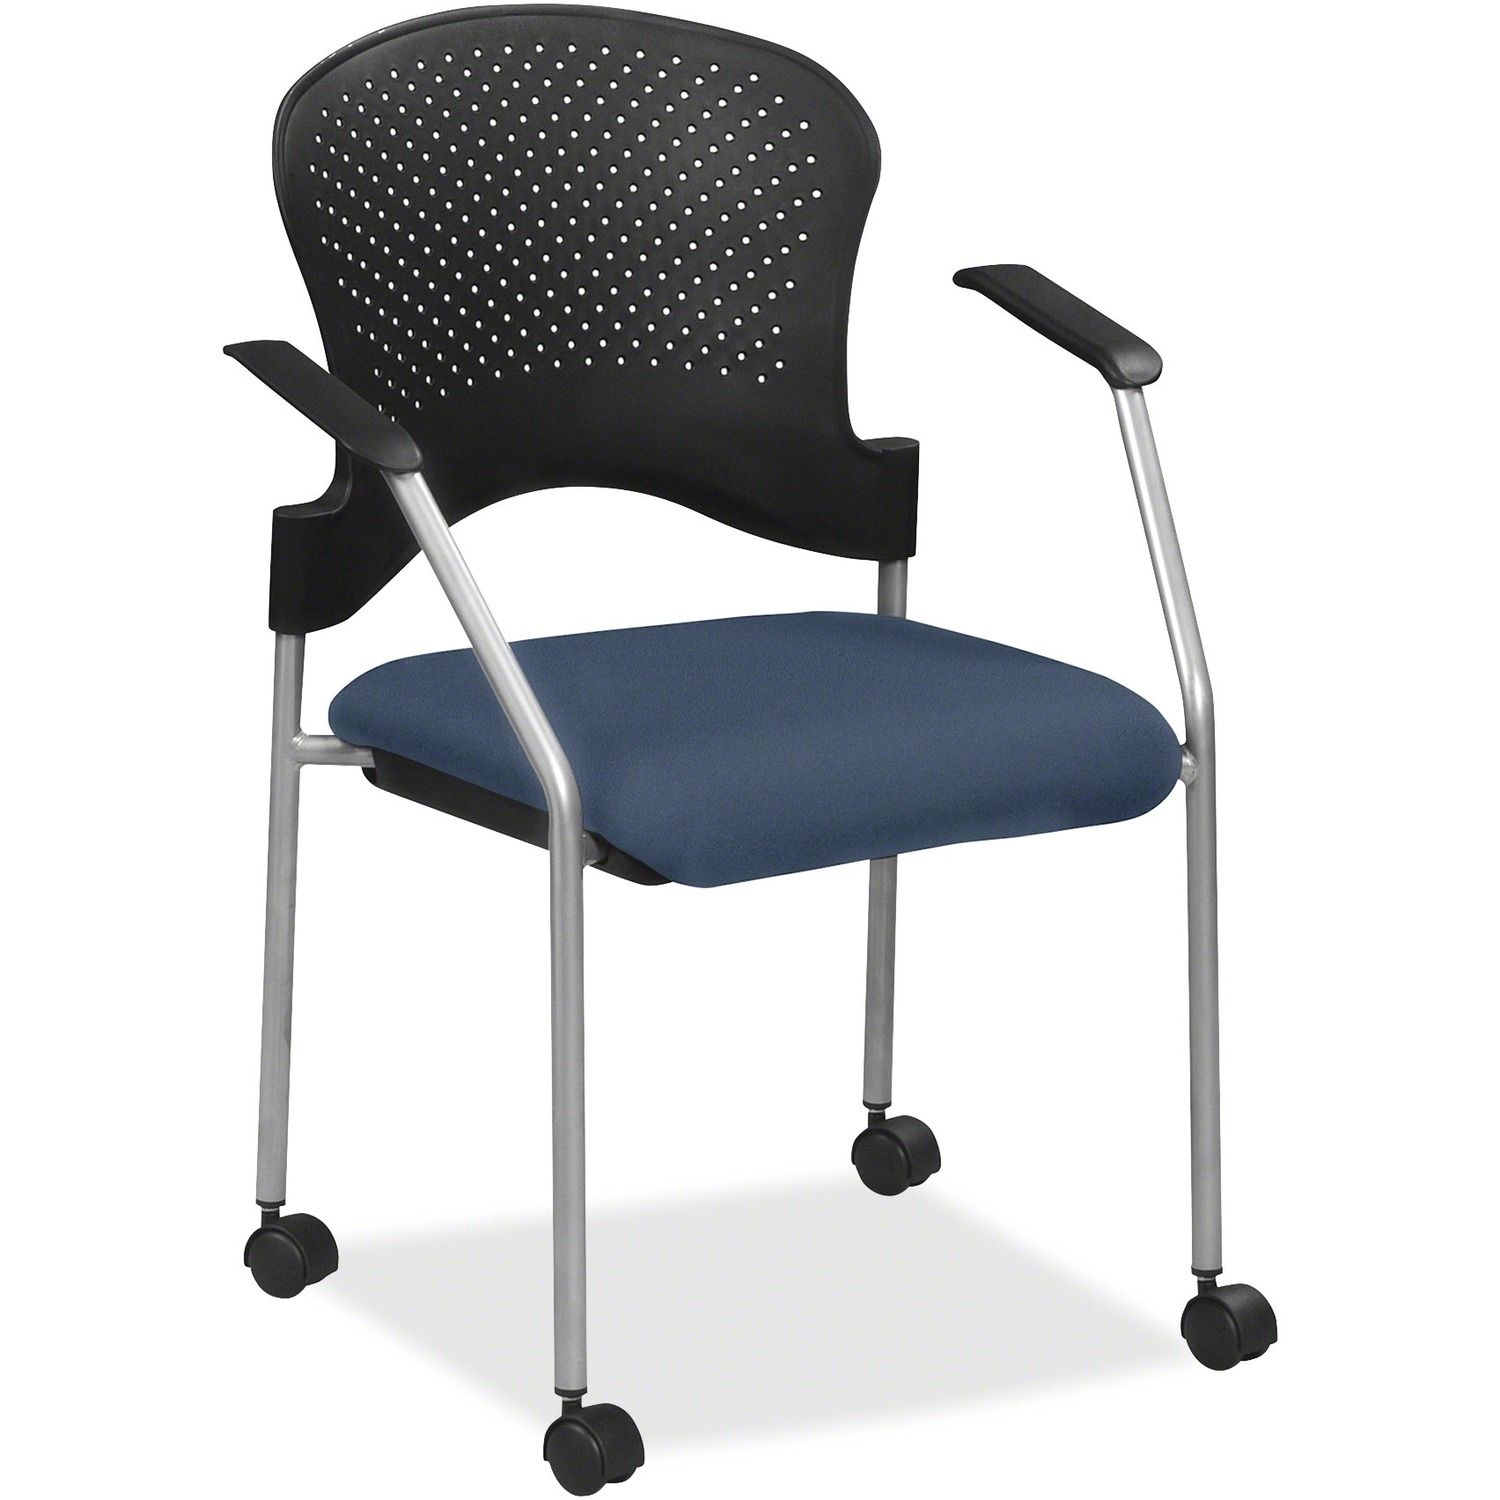 breeze FS8270 Stacking Chair Navy Fabric Seat, Navy Back, Gray Steel Frame, Four-legged Base, 1 Each